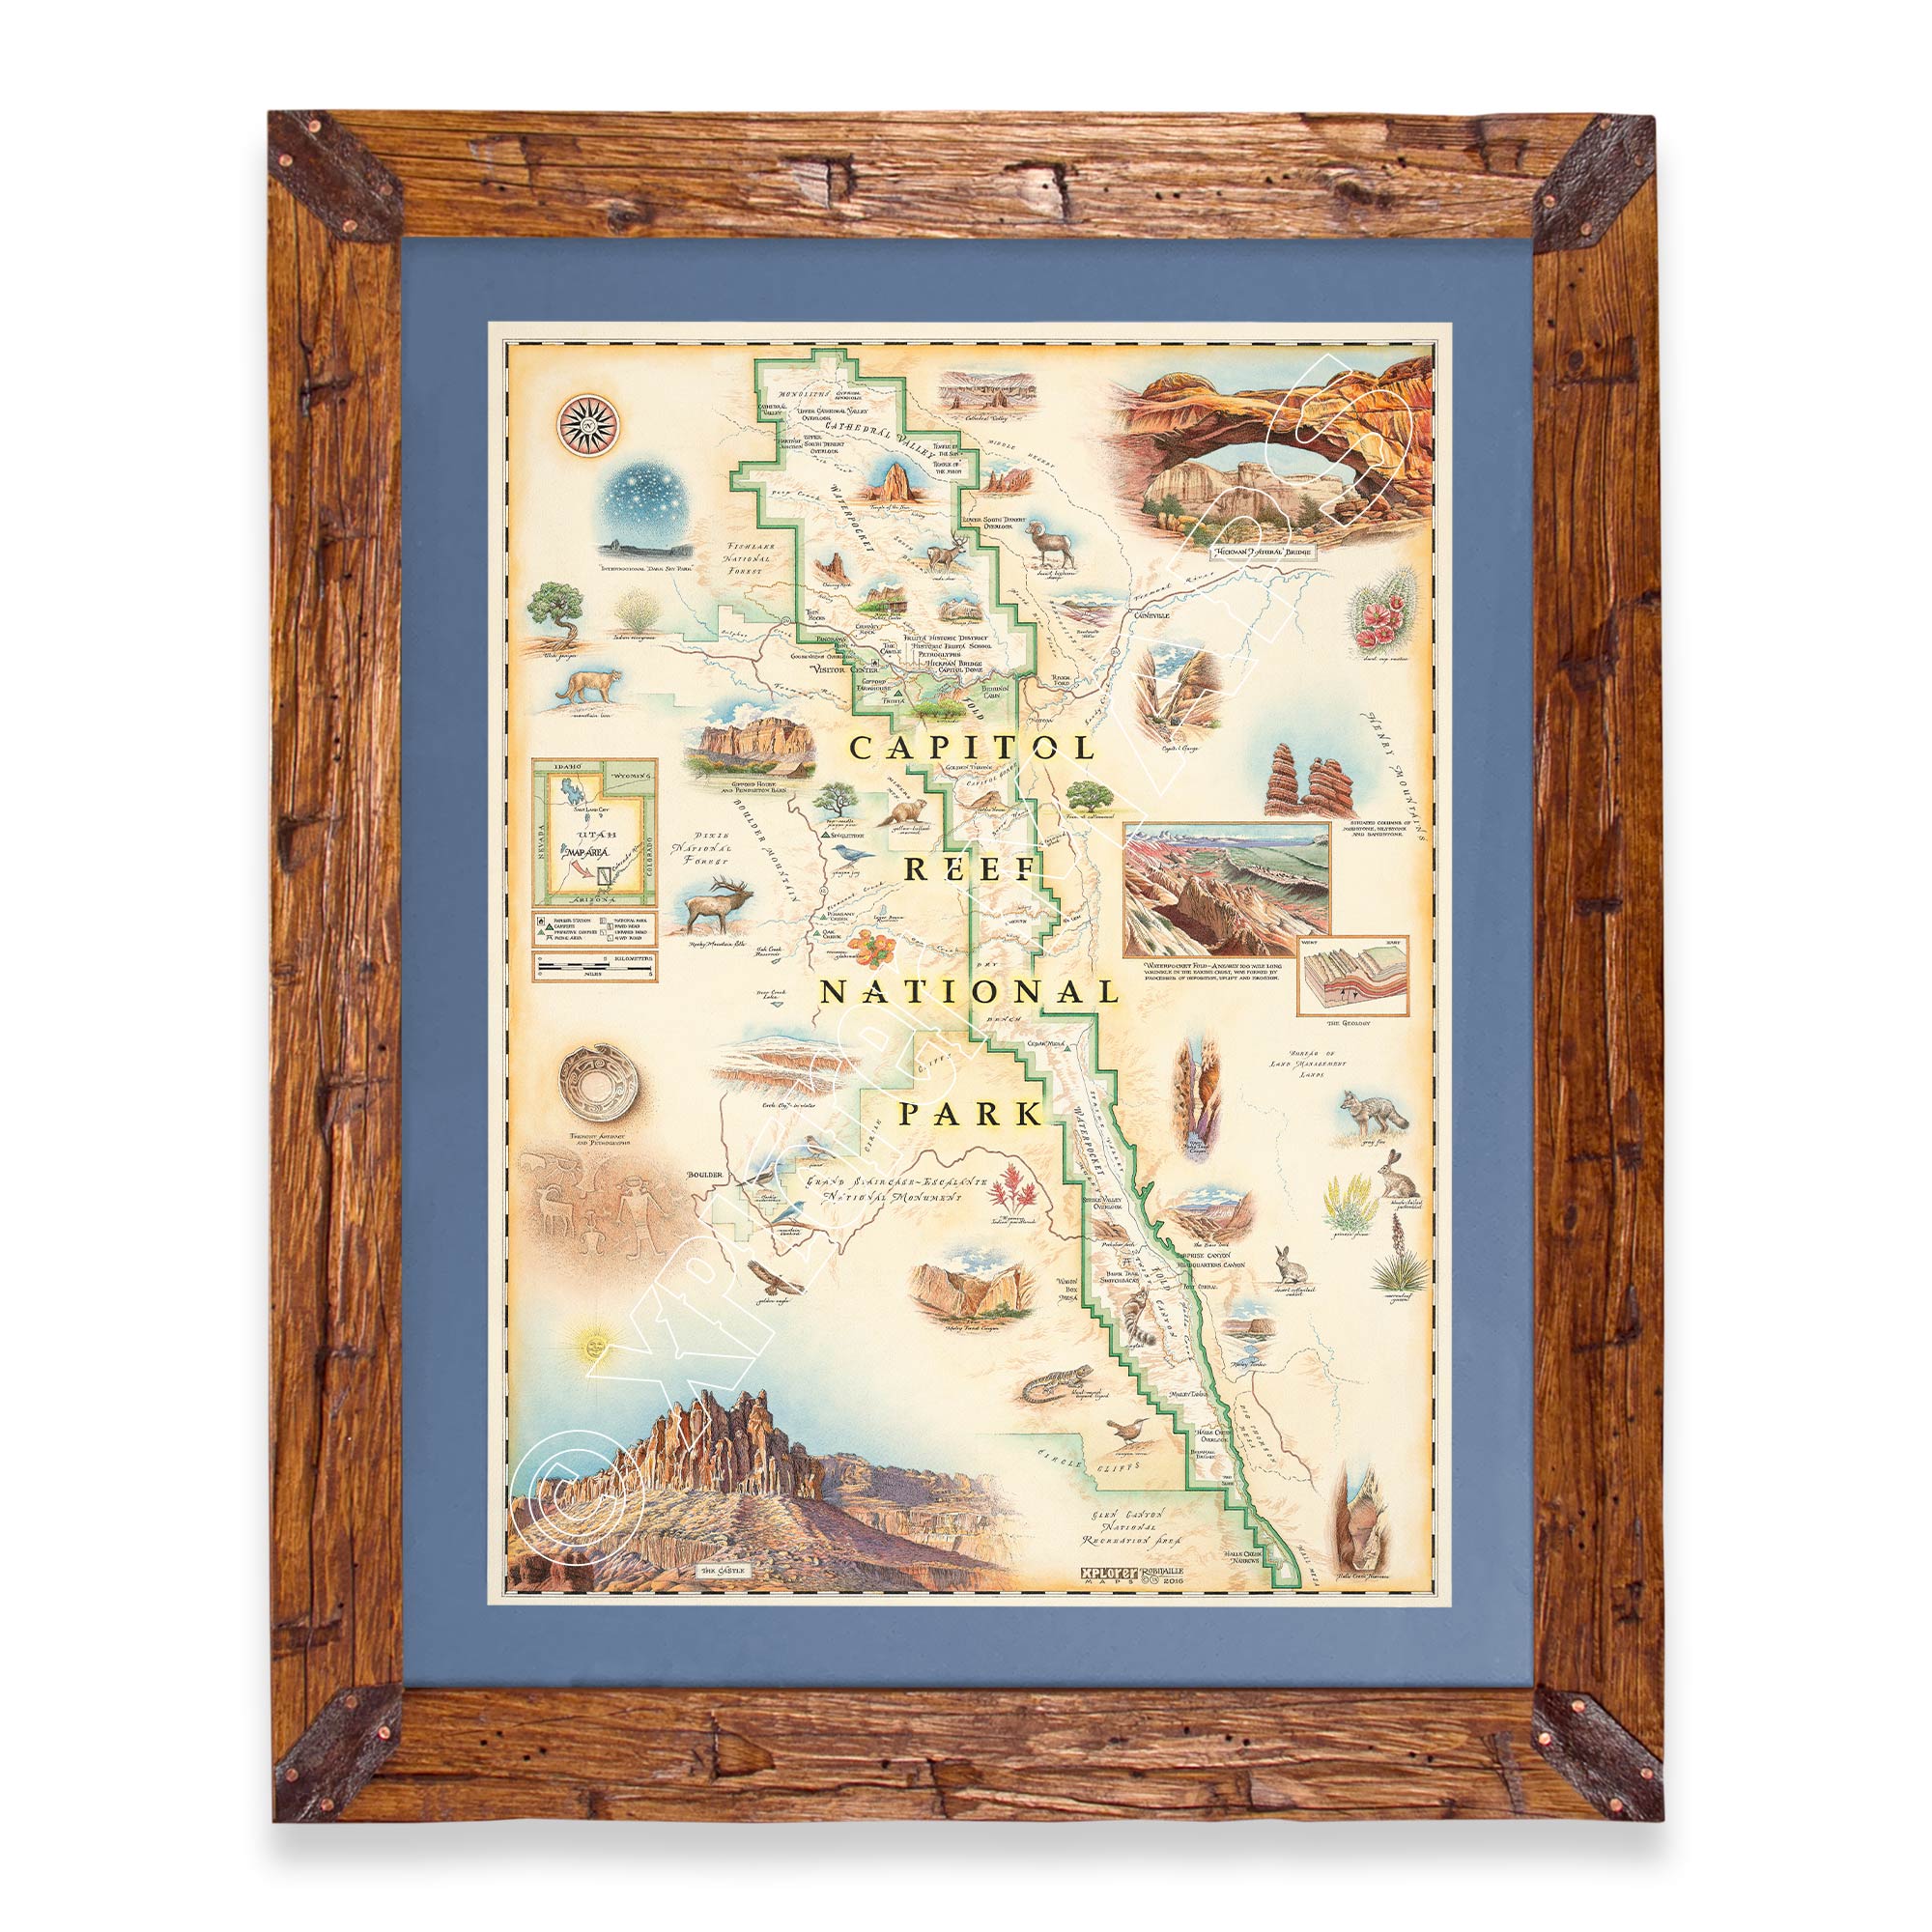 Utah's Capitol Reef National Park hand-drawn map in a Montana hand-scraped pine wood frame with blue mat.